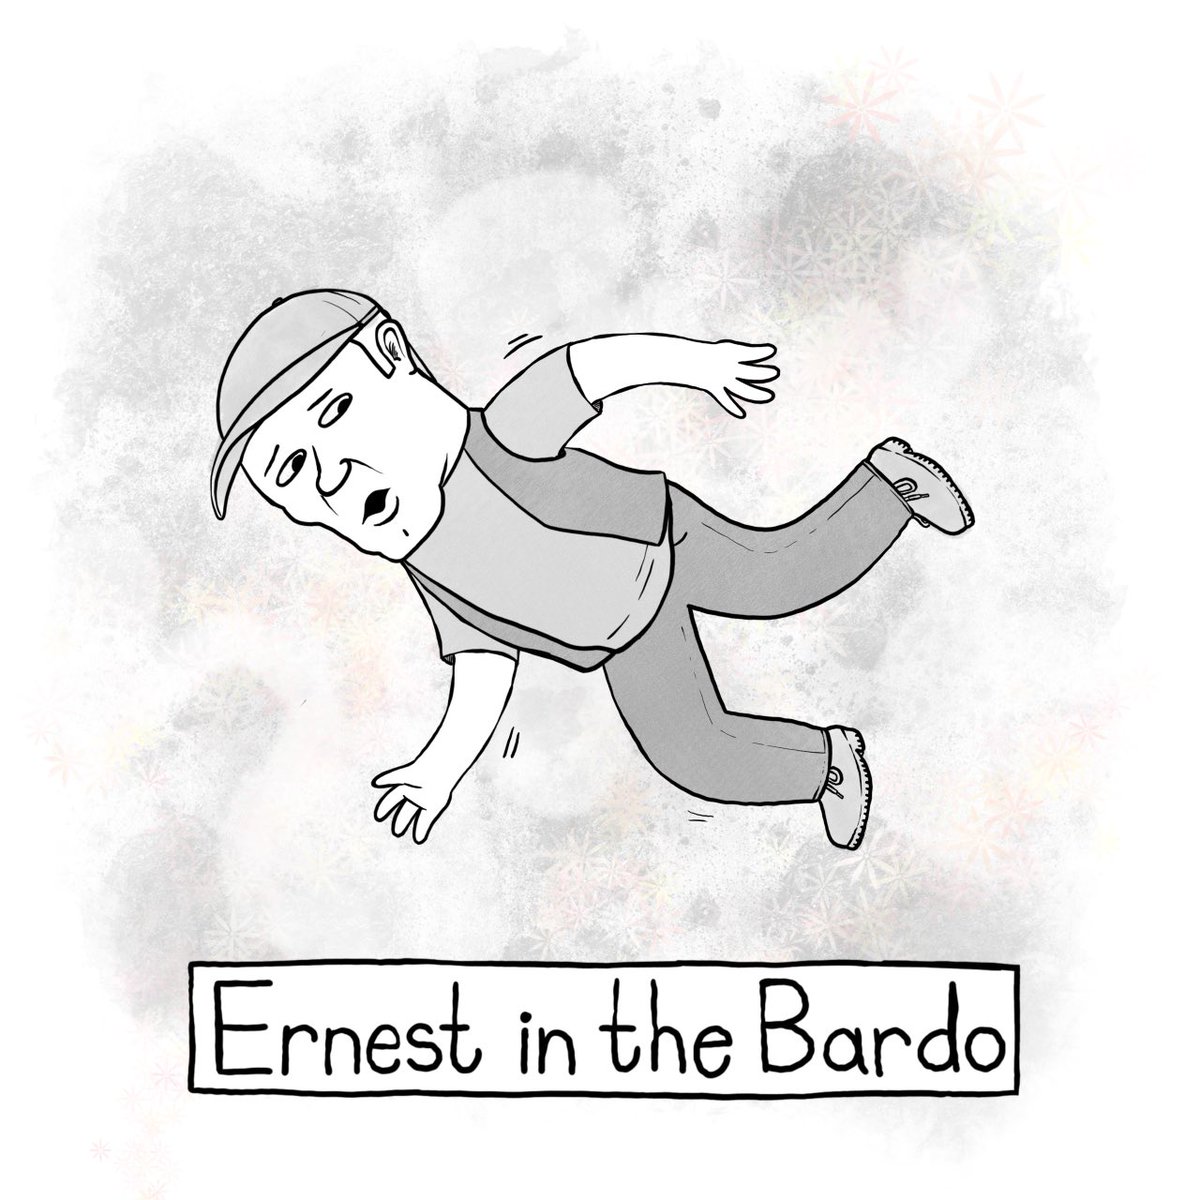 The rejoinder to George Saunders’ Lincoln In The Bardo the world’s been waiting for. #ernestpworrell #ernest #vern #cartoon #stupid